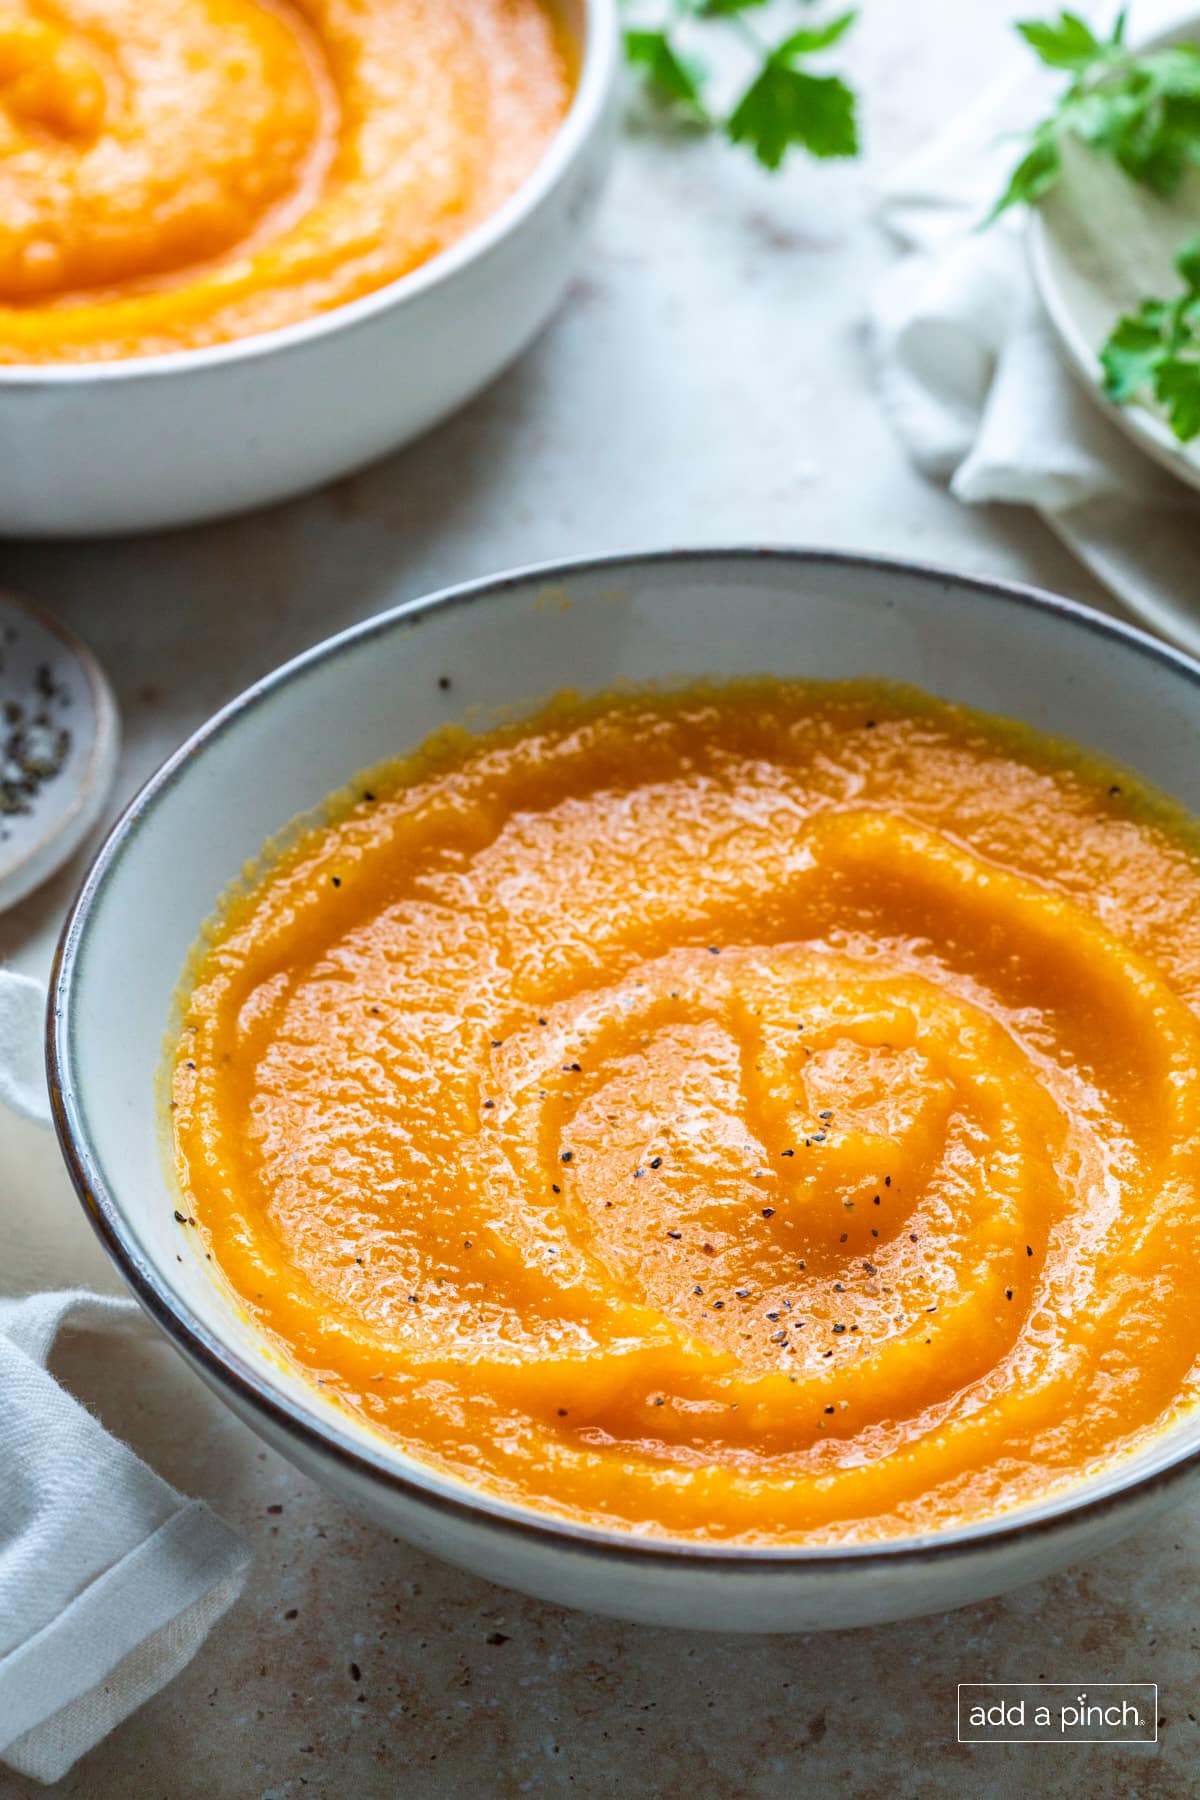 Roasted butternut squash soup in white bowl with dark edge.